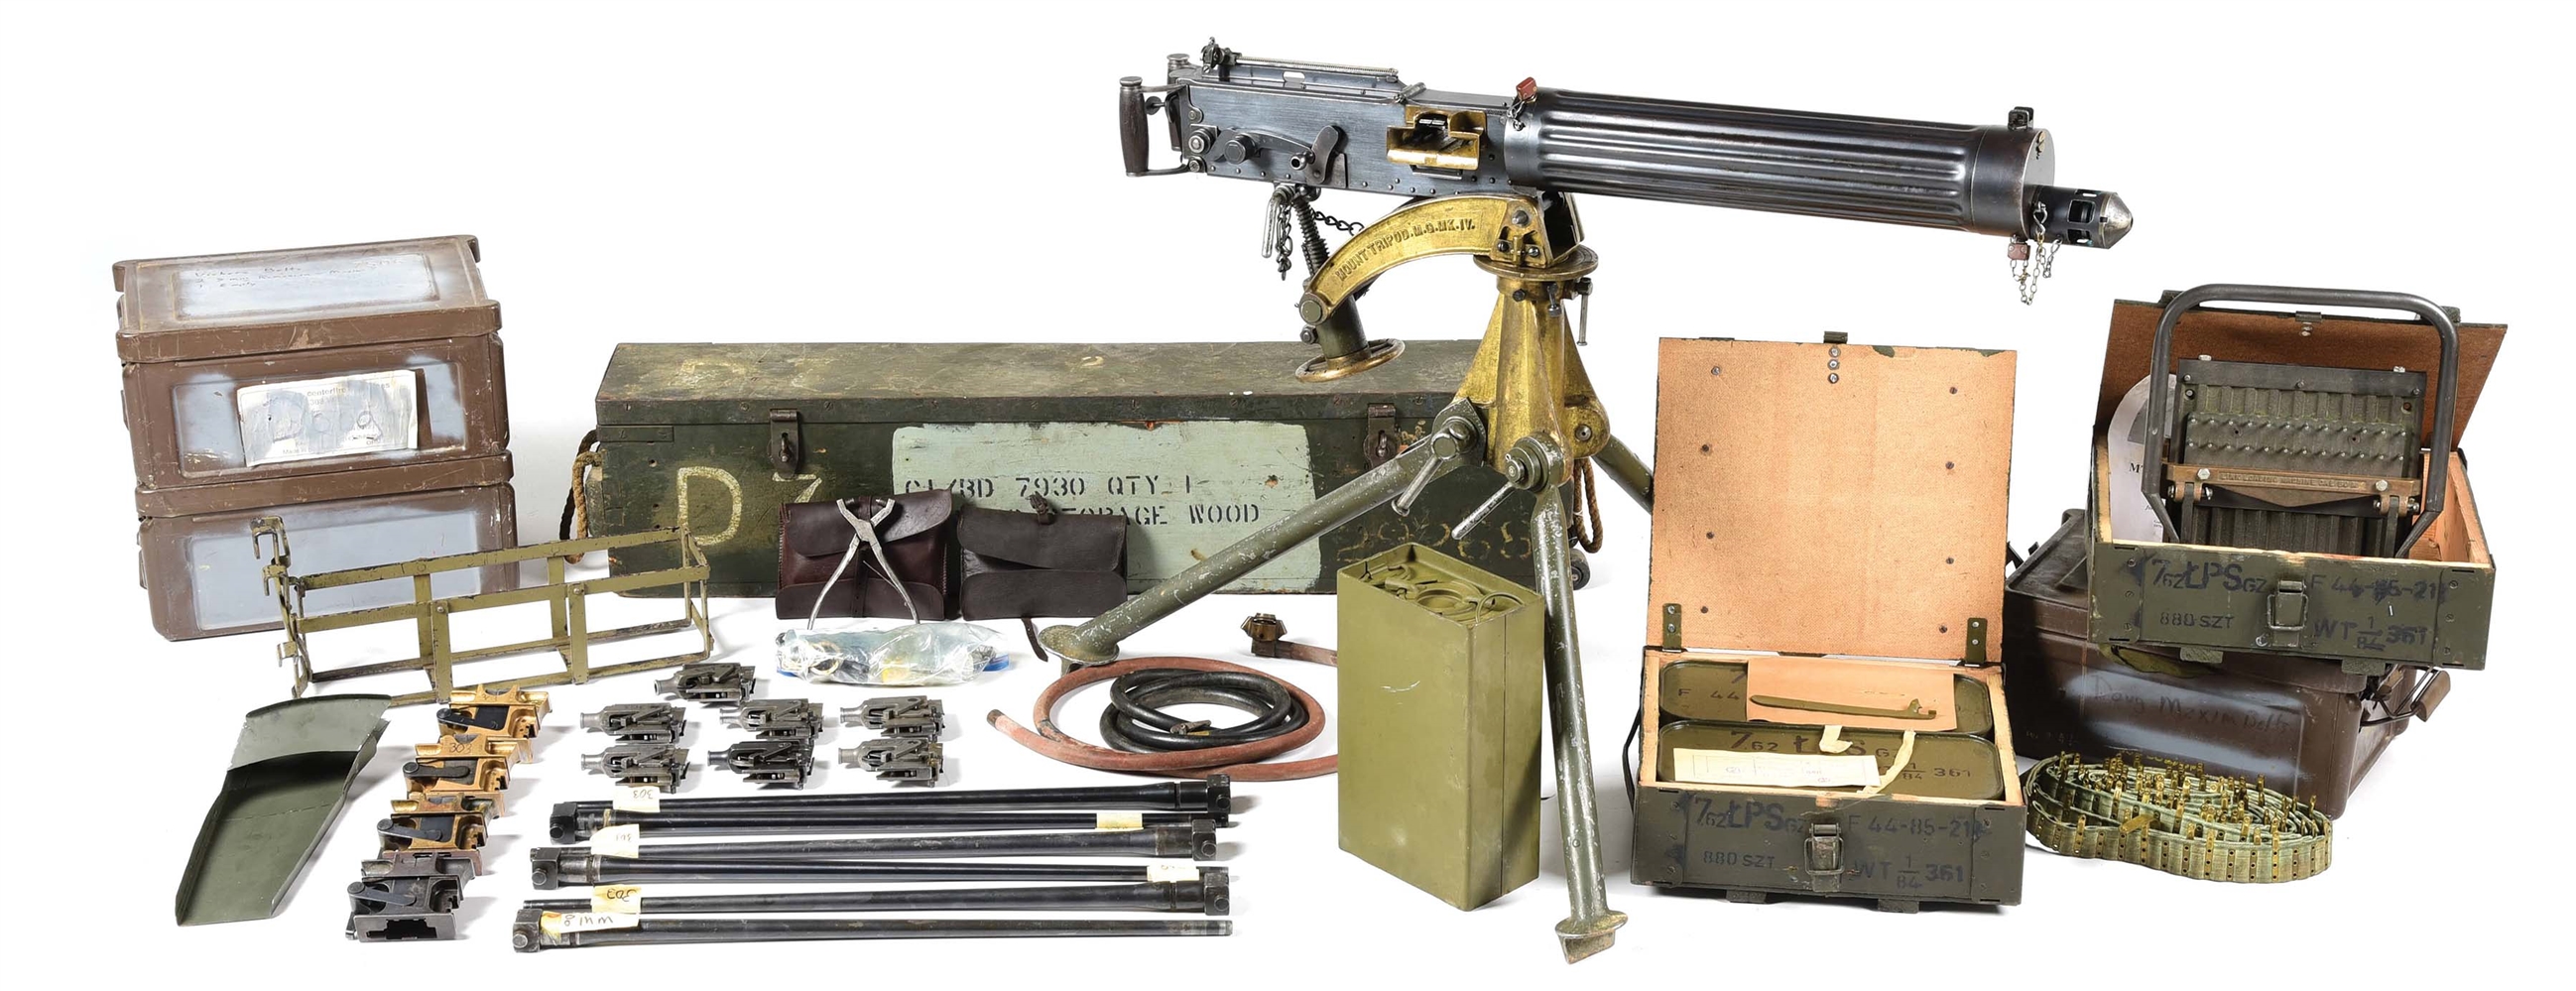 (N) EXCEPTIONALLY WELL ACCESSORIZED VSM REGISTERED BRITISH COMMERCIAL MANUFACTURED VICKERS HEAVY MACHINE GUN WITH TRANSIT CHEST & TRIPOD (FULLY TRANSFERABLE).